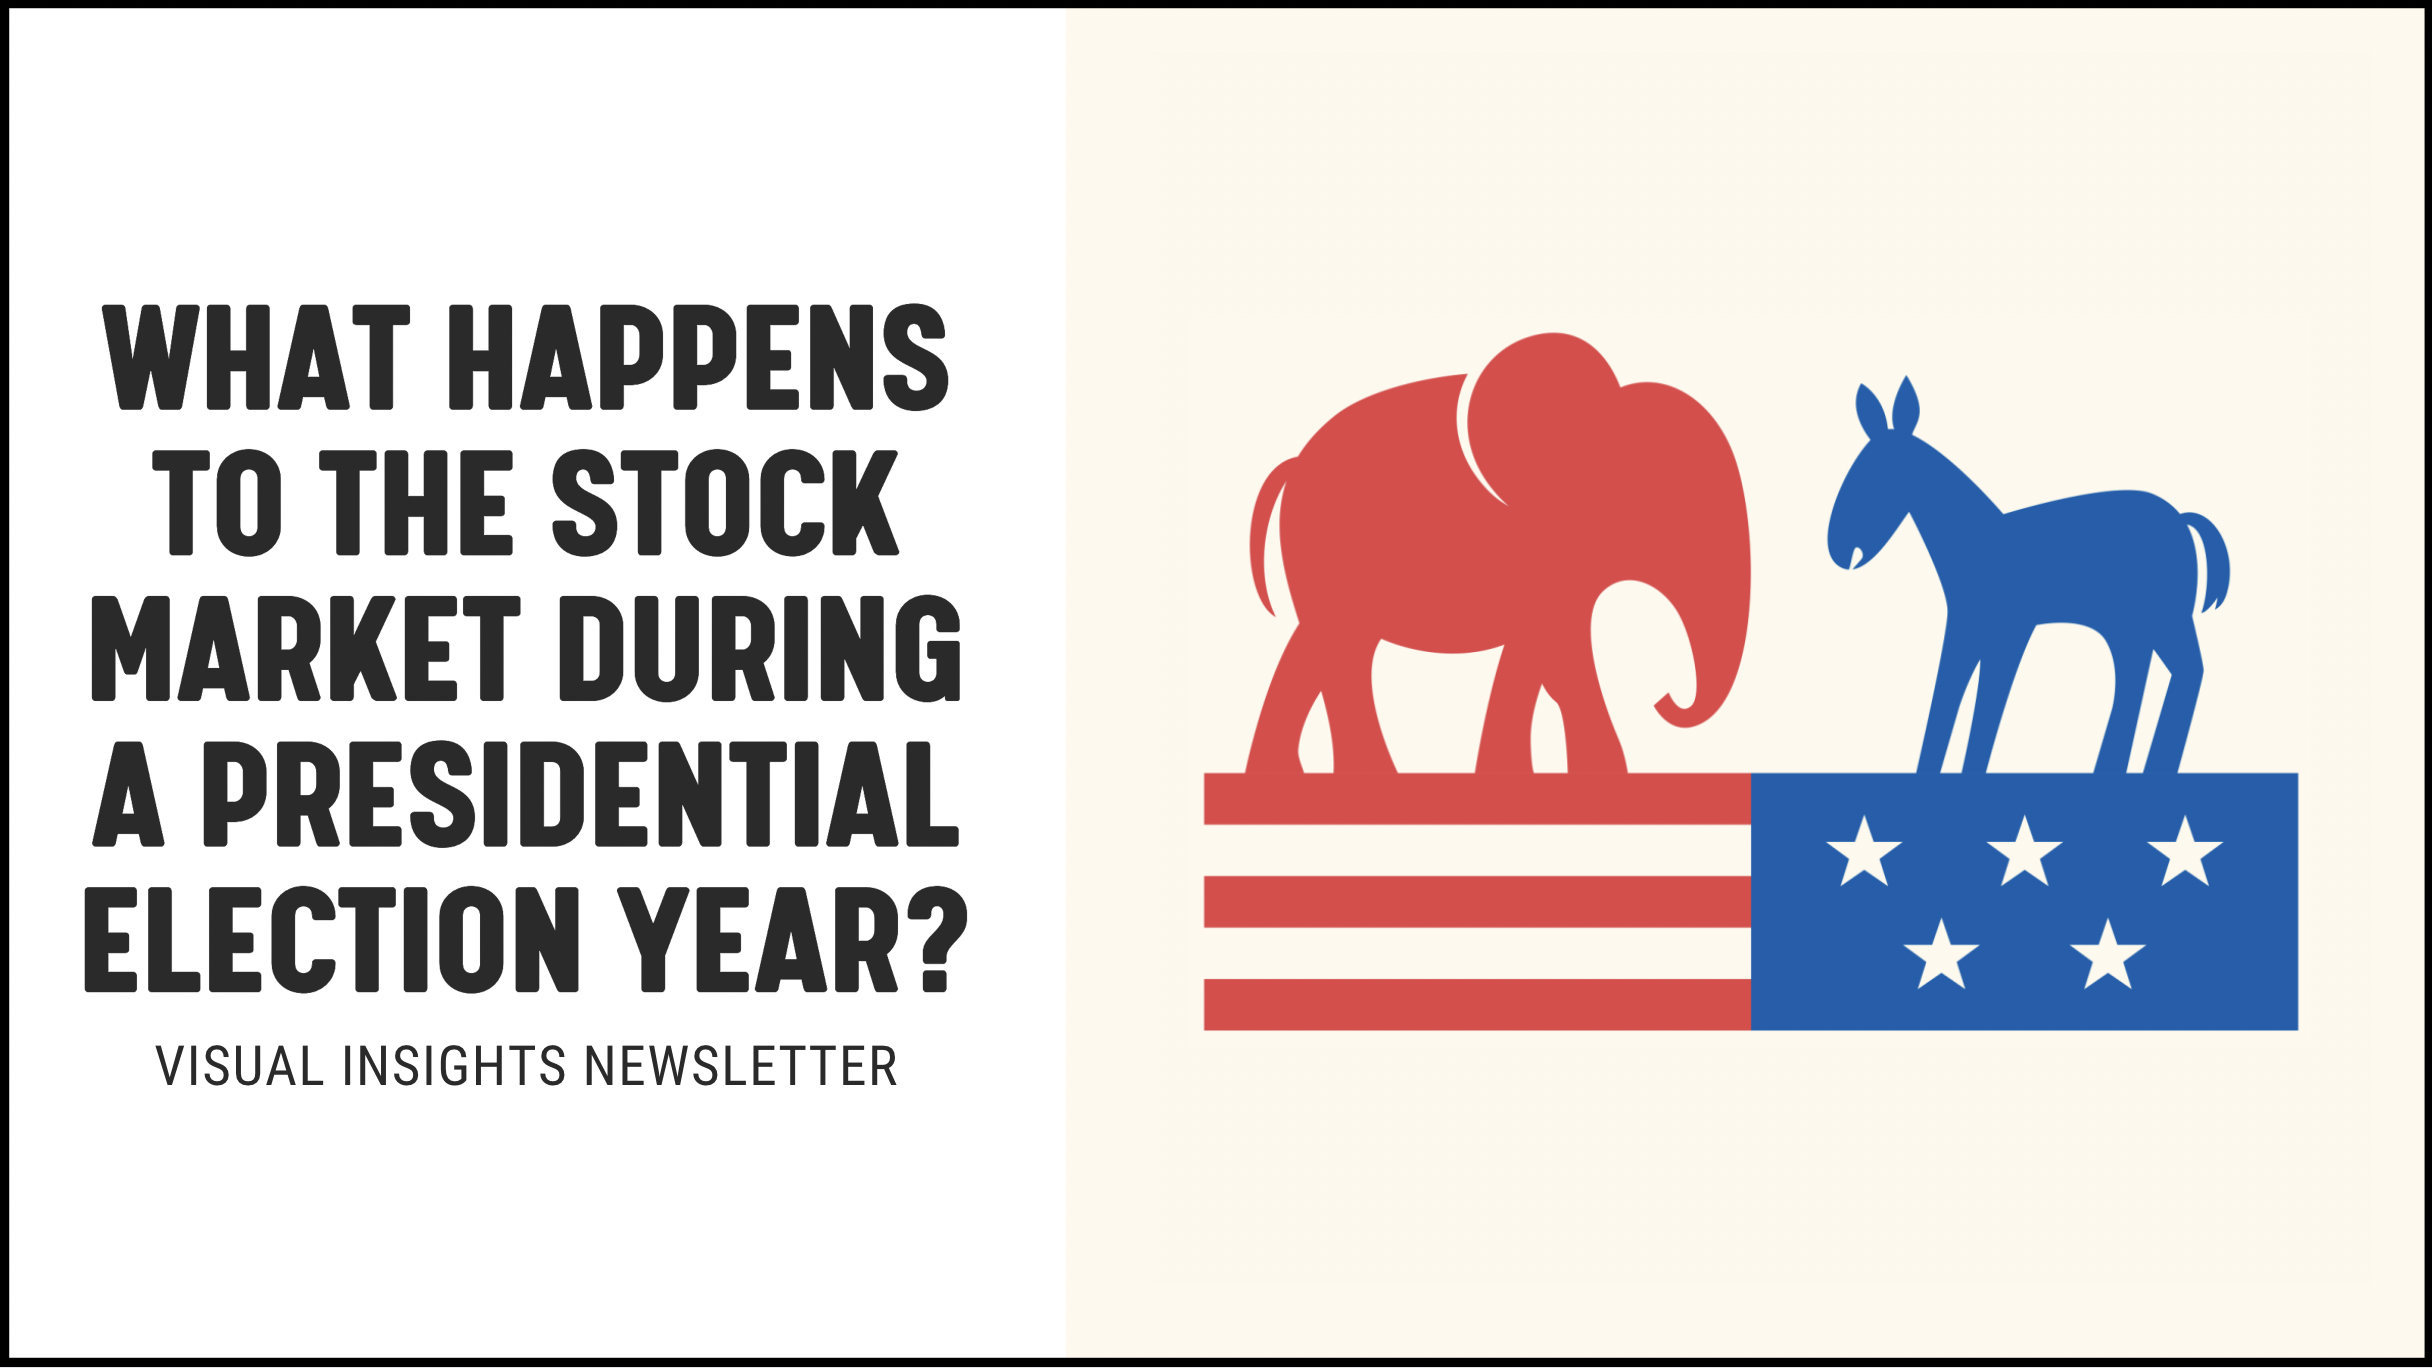 [NEW] What Happens to the Stock Market During a Presidential Election Year? - Visual Insights Newslettter Marketing Campaigns For Financial Advisors